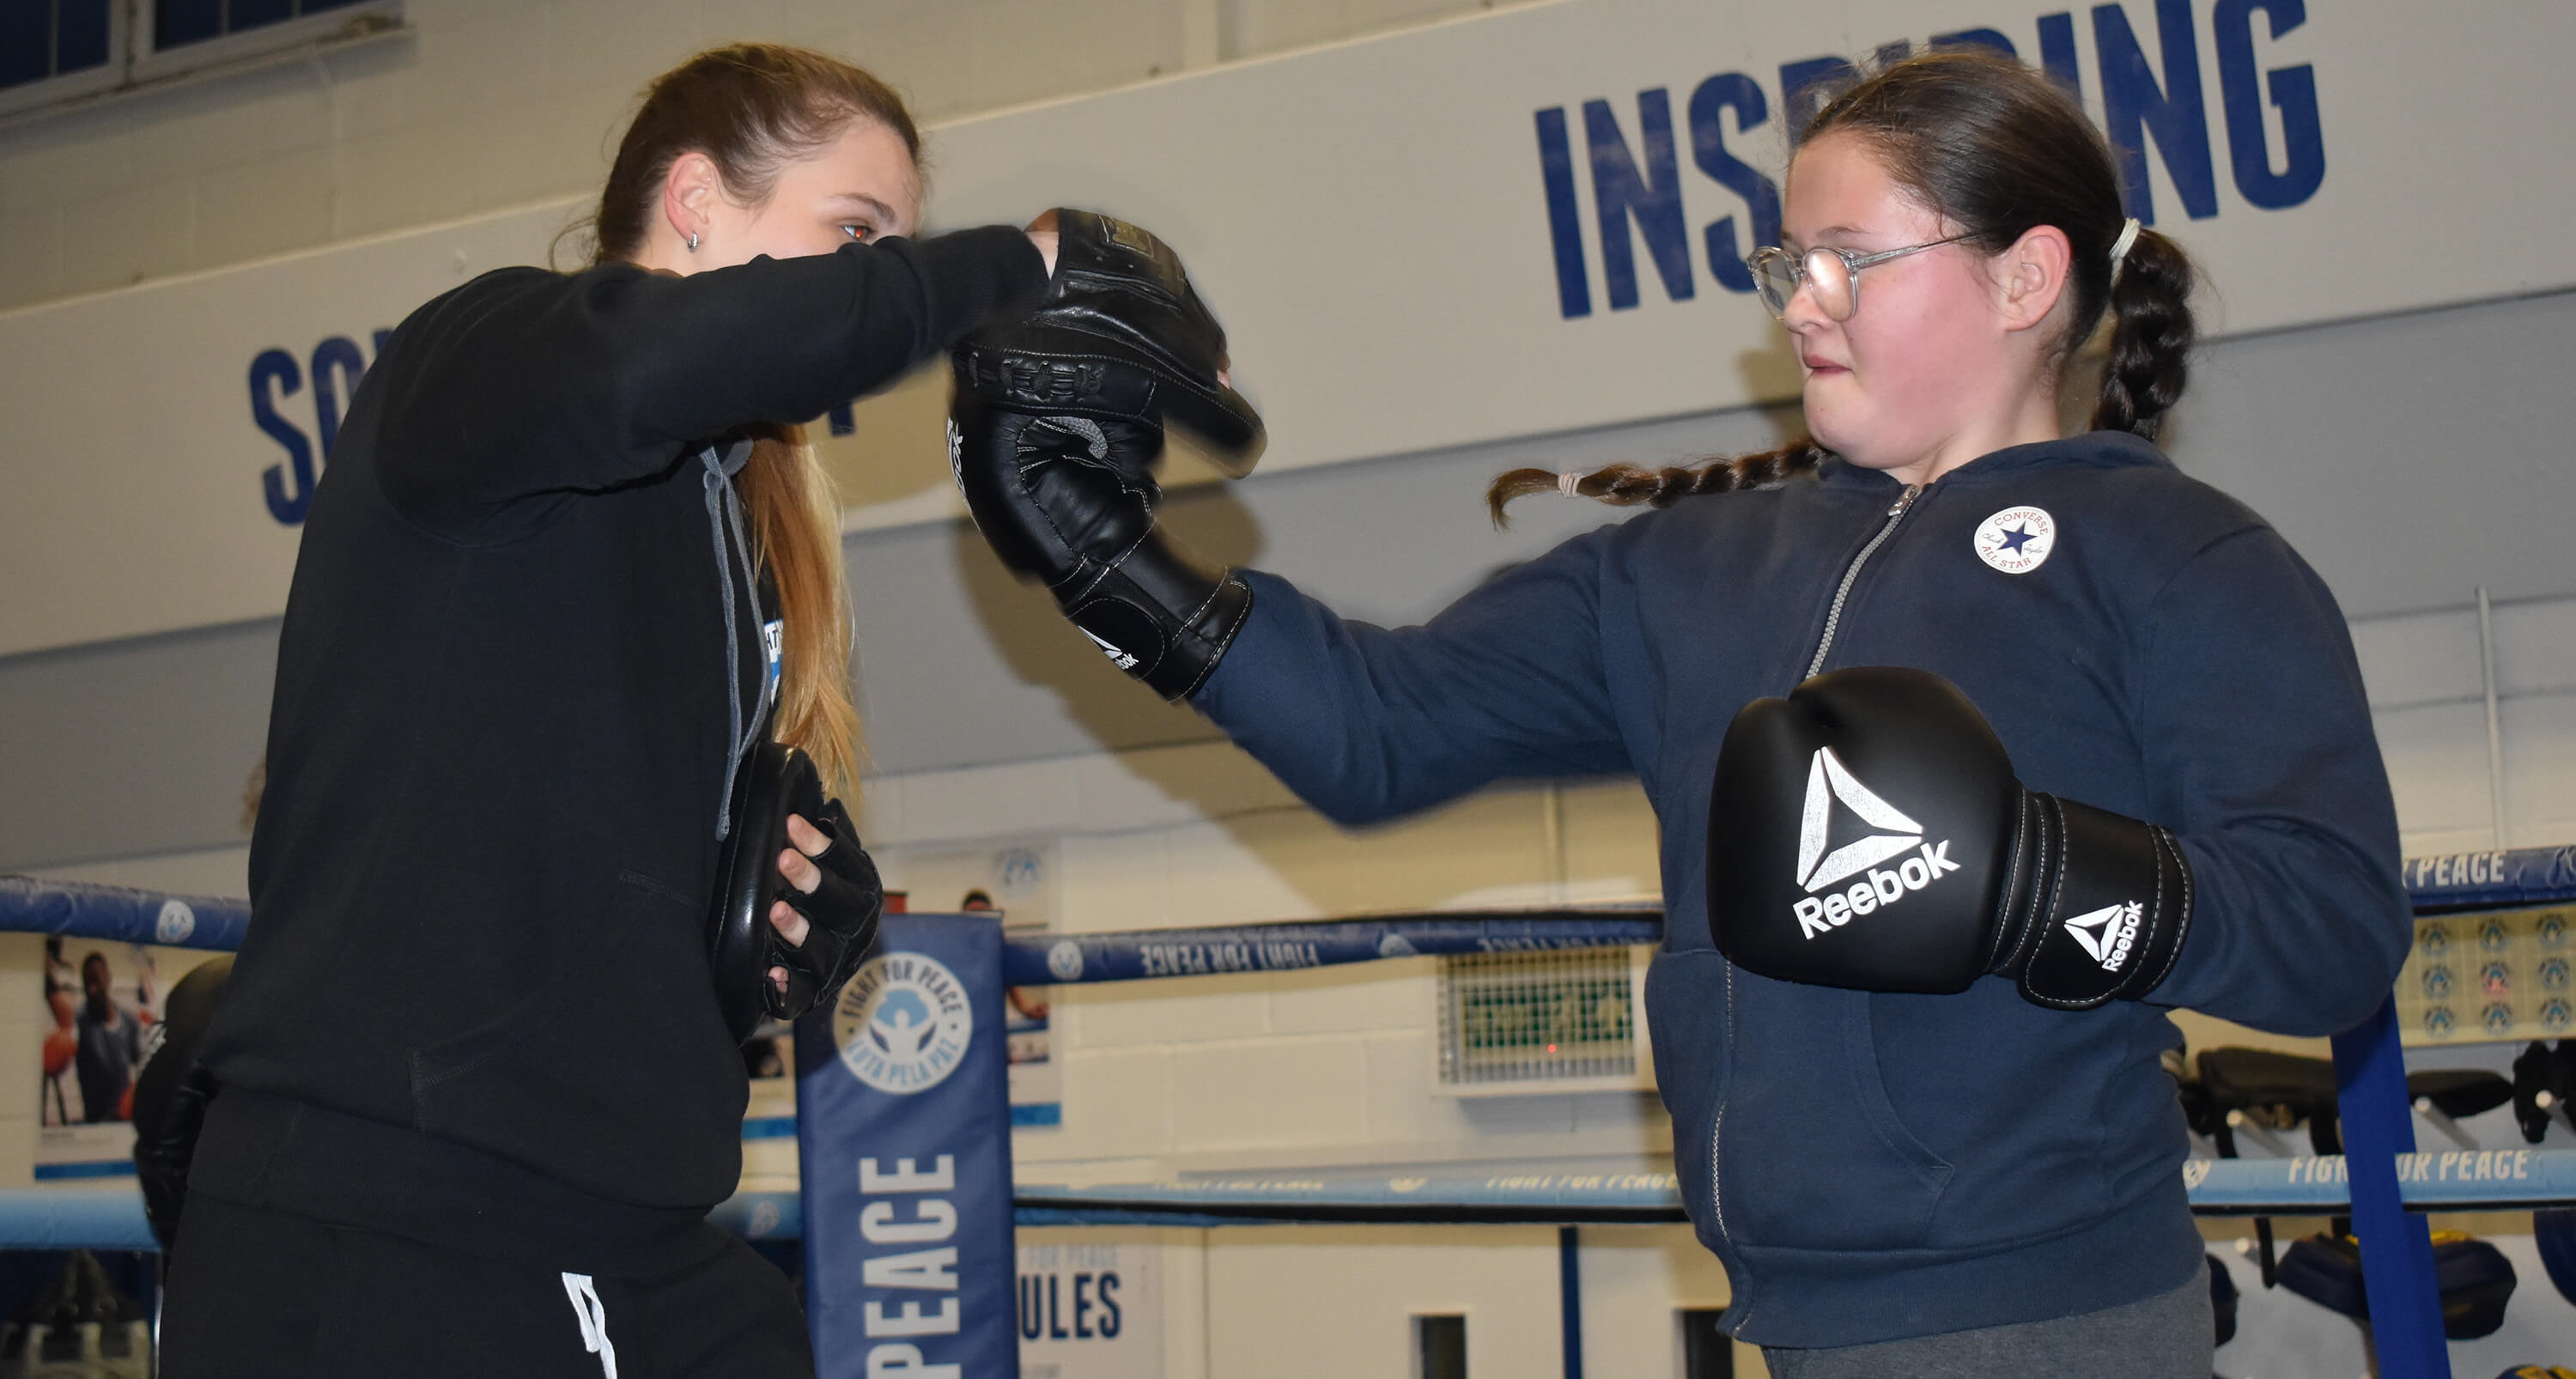 A young boxer delivers an uppercut on the pads during training with their coach in the ring